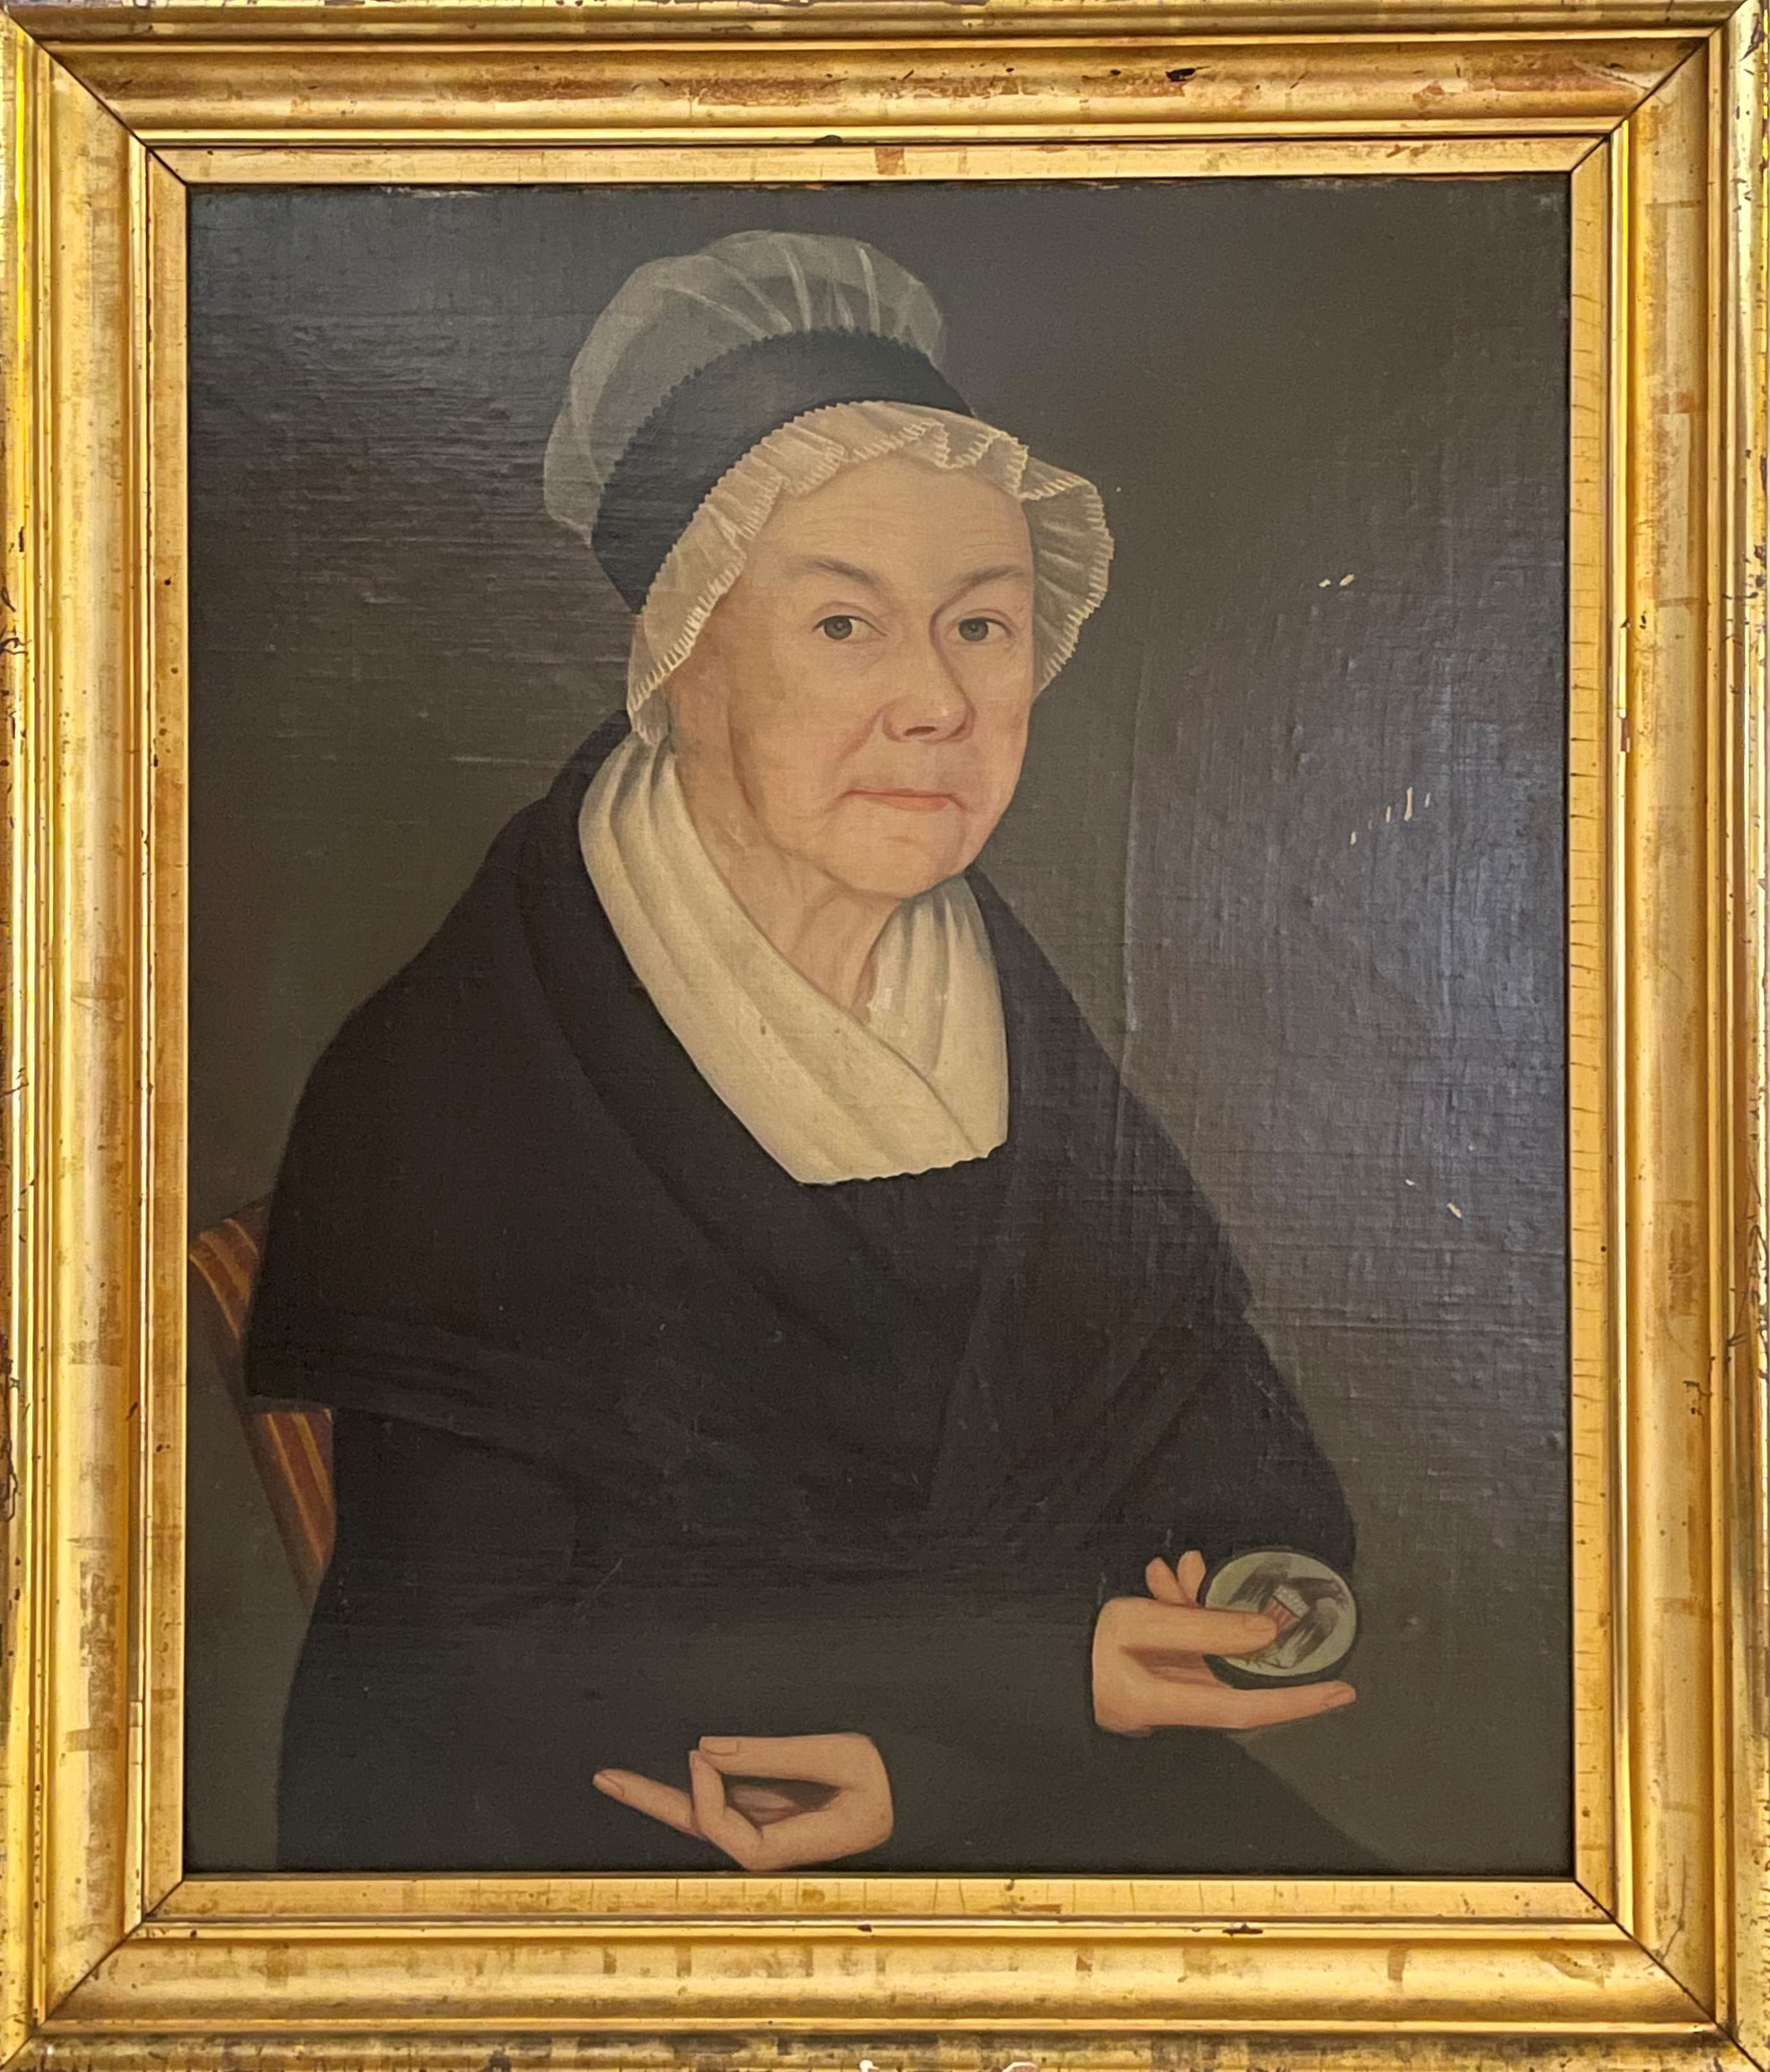 Portrait of Annatje Eltinge Wynkoop, painted circa 1821 by Ammi Phillips. Historic Huguenot Street Permanent Collection, gift of Marie J. Wiersum. Courtesy of Historic Huguenot Street